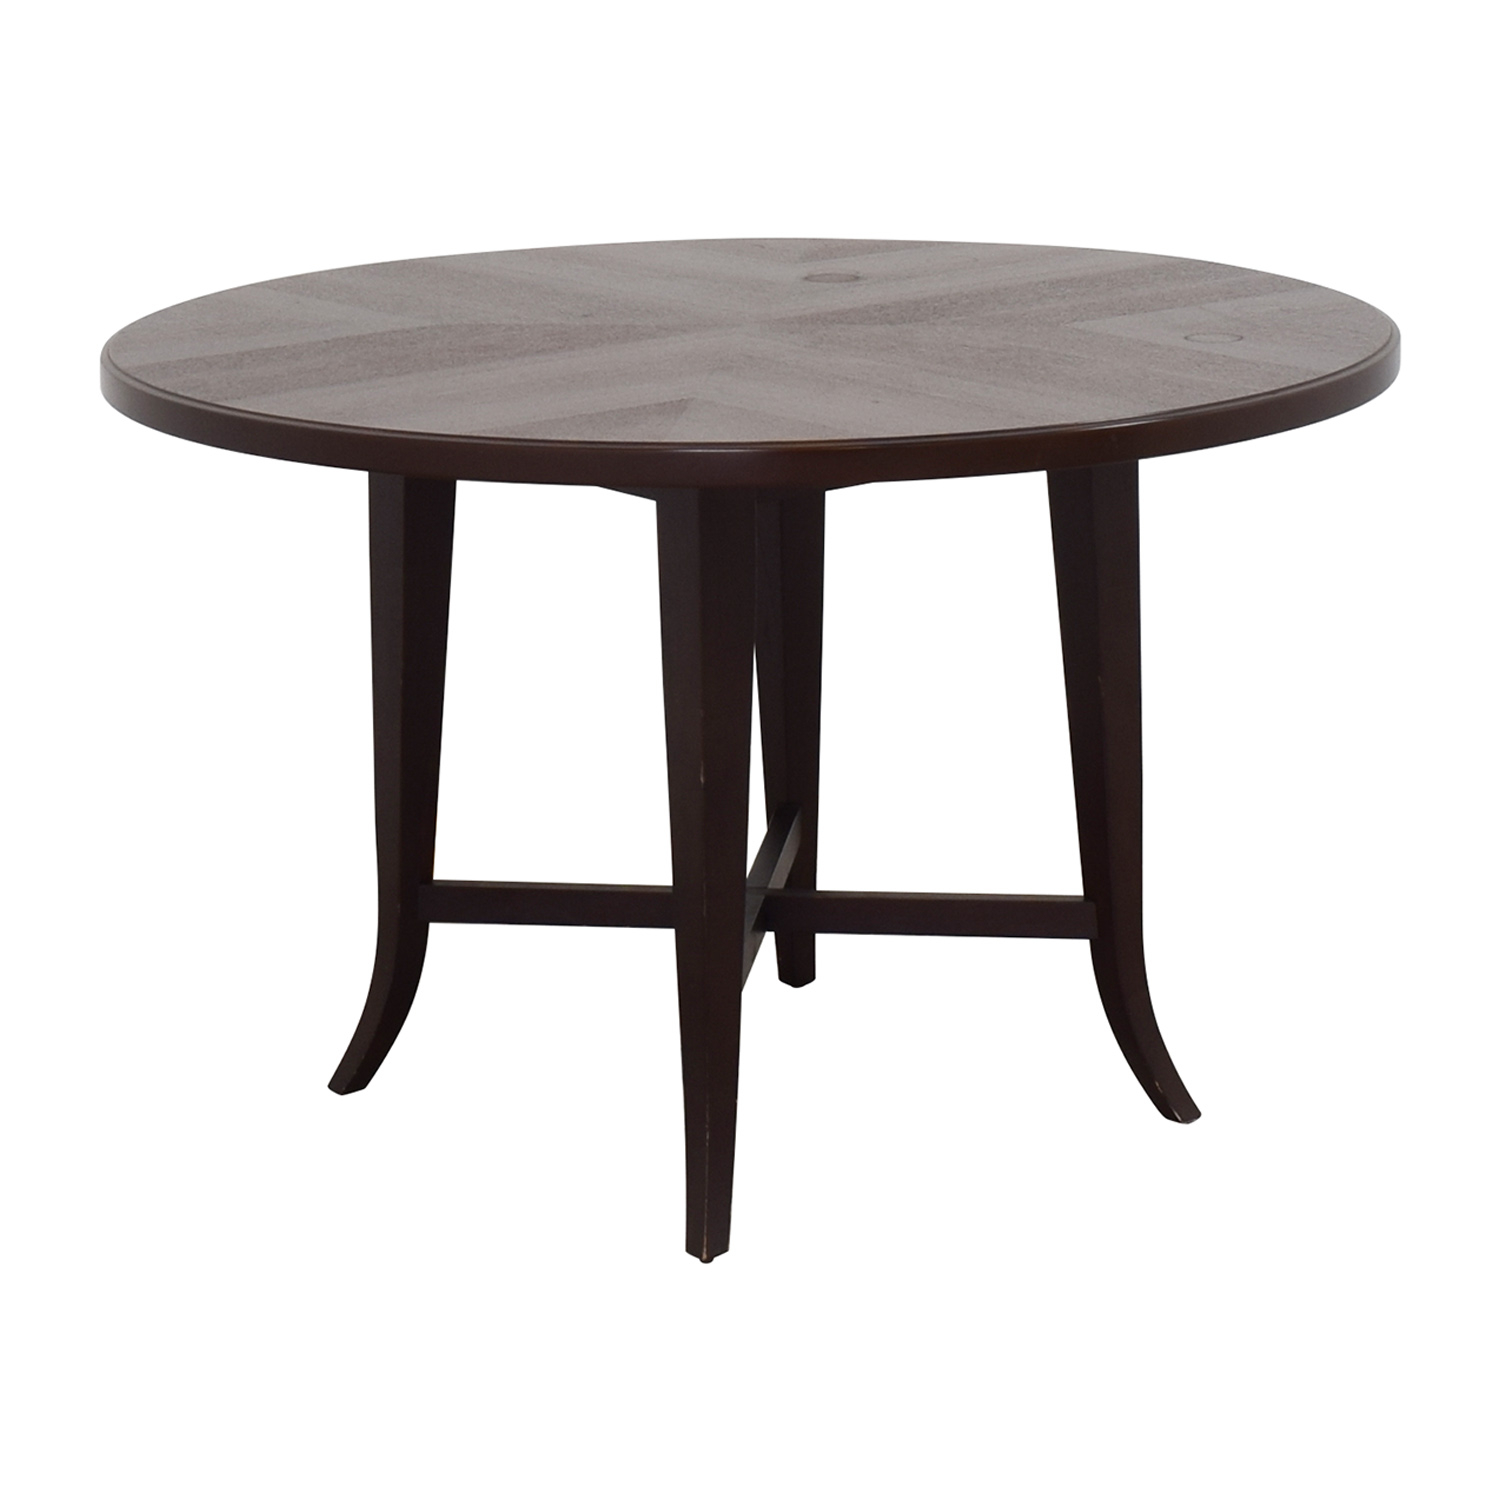 82 Off Crate Barrel Crate Barrel Round Dining Table Tables pertaining to size 1500 X 1500